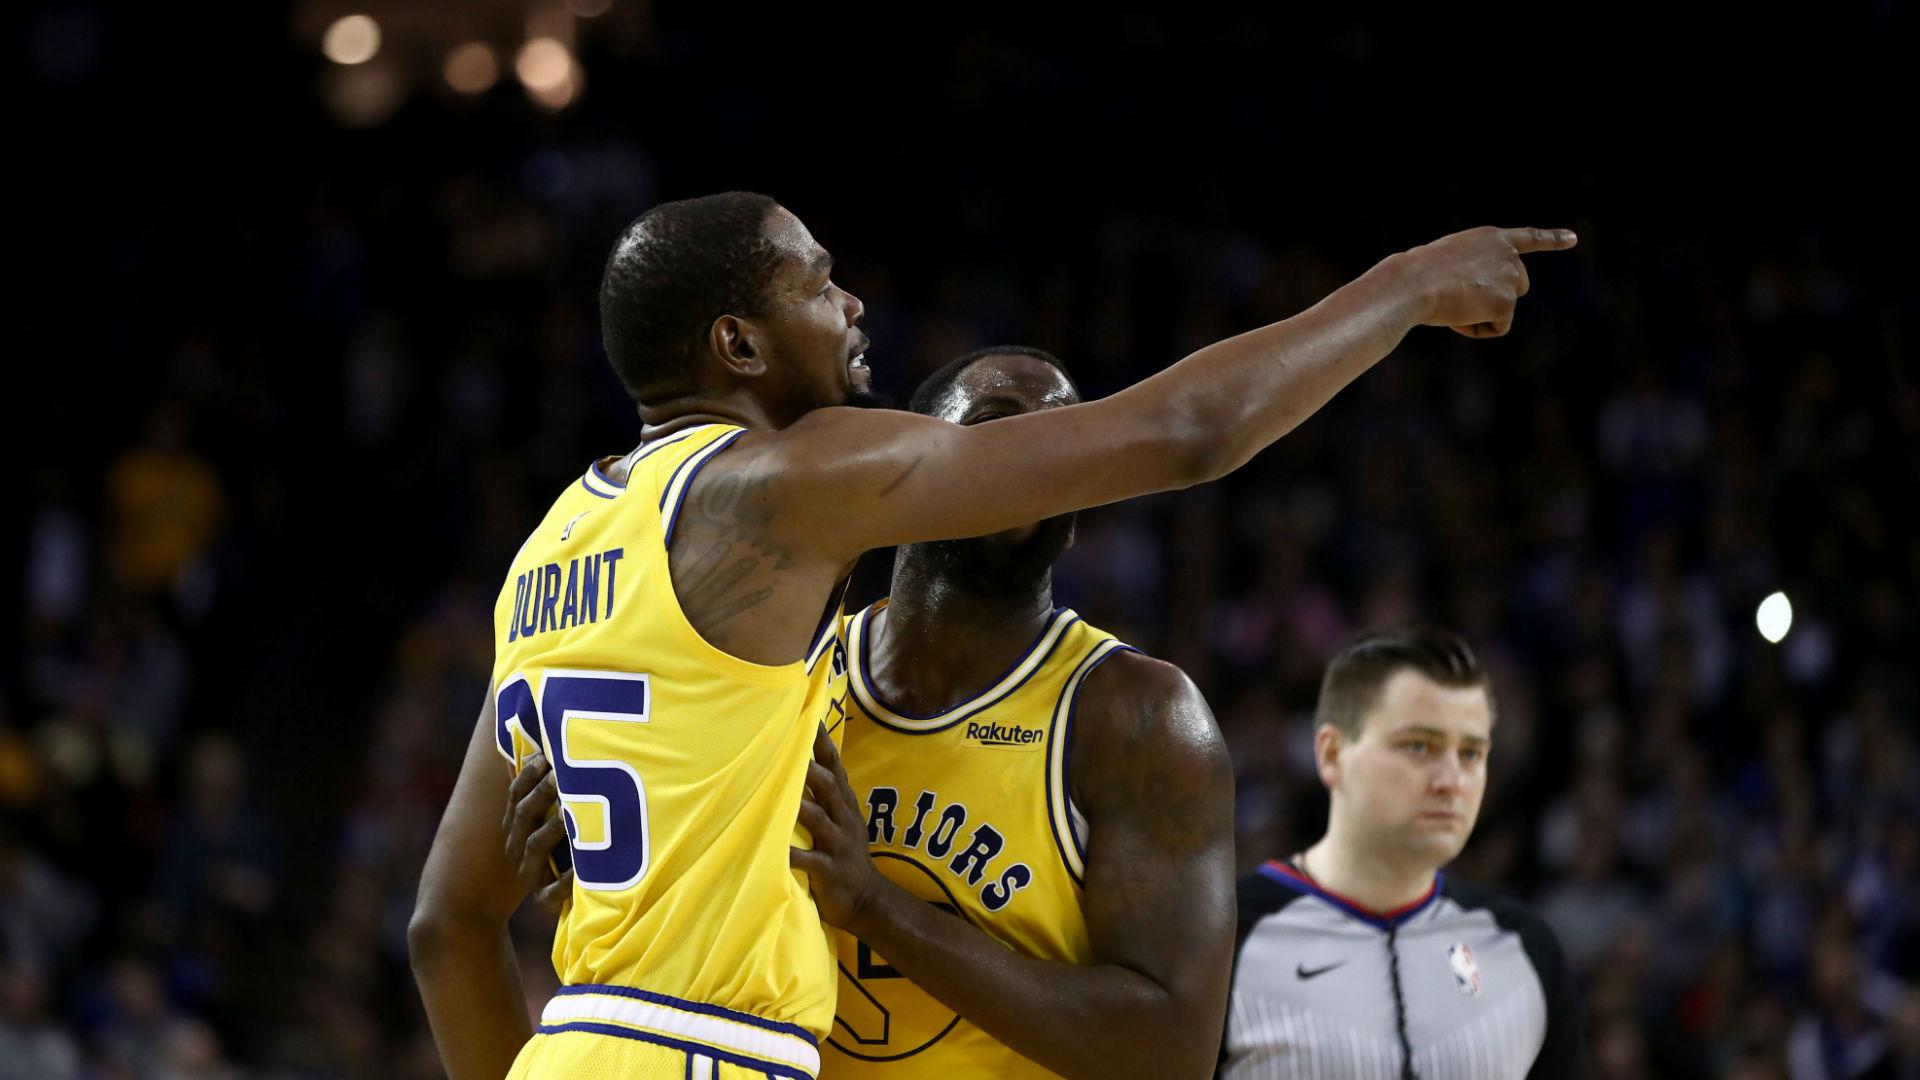 NBA playoffs 2019: Kevin Durant, Patrick Beverley ejected